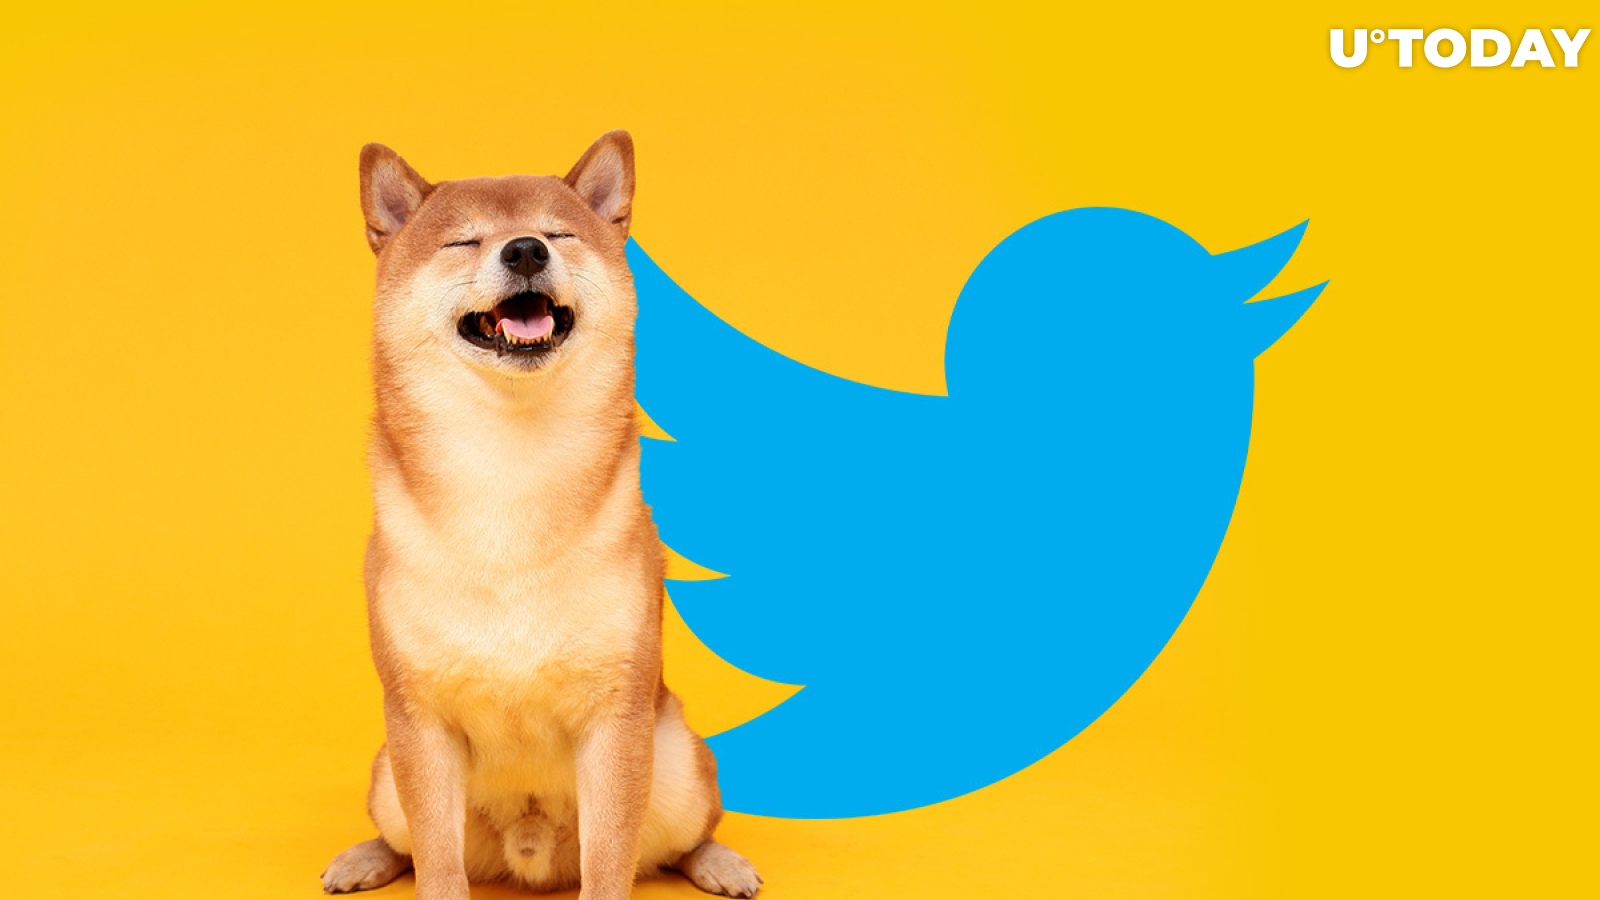 Elon Musk Tweets About DOGE's Shiba Inu Again, Here's What He Shows This Time